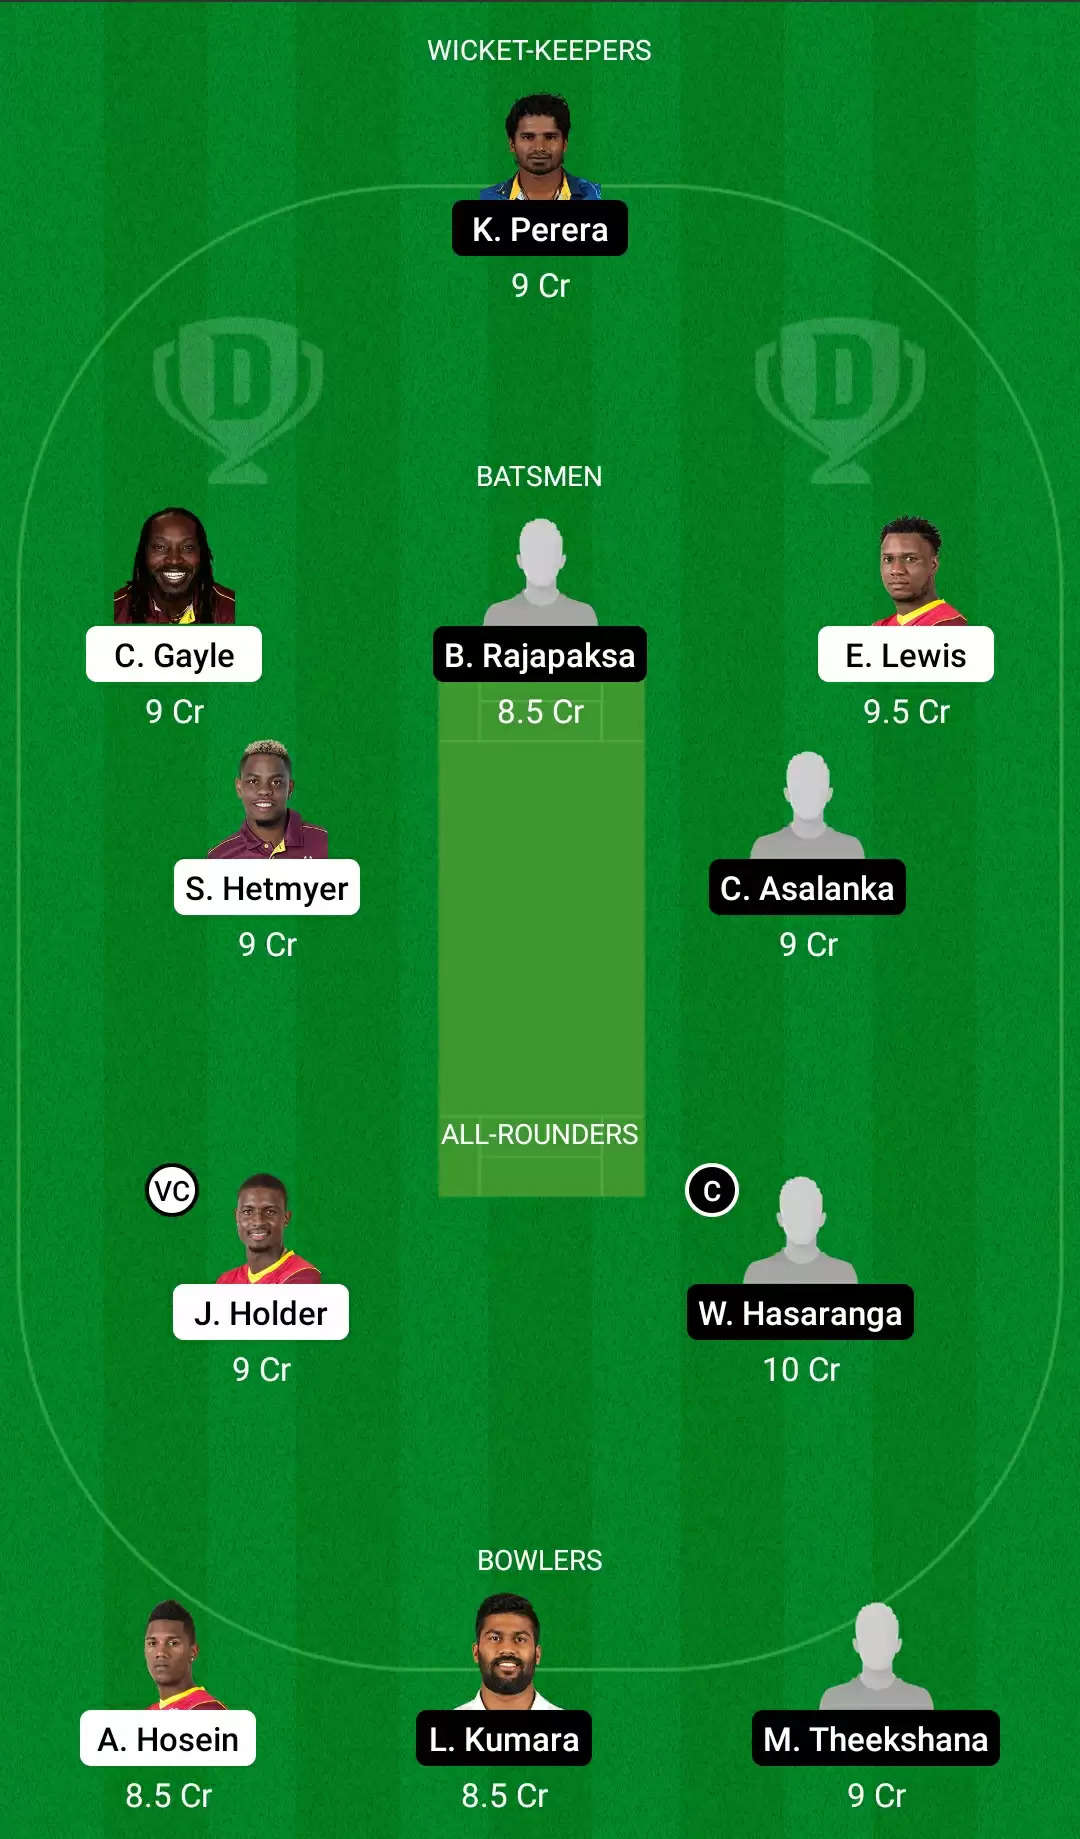 WI vs SL Dream11 Prediction for T20 World Cup 2021: Playing XI, Fantasy Cricket Tips, Team, Weather Updates and Pitch Report